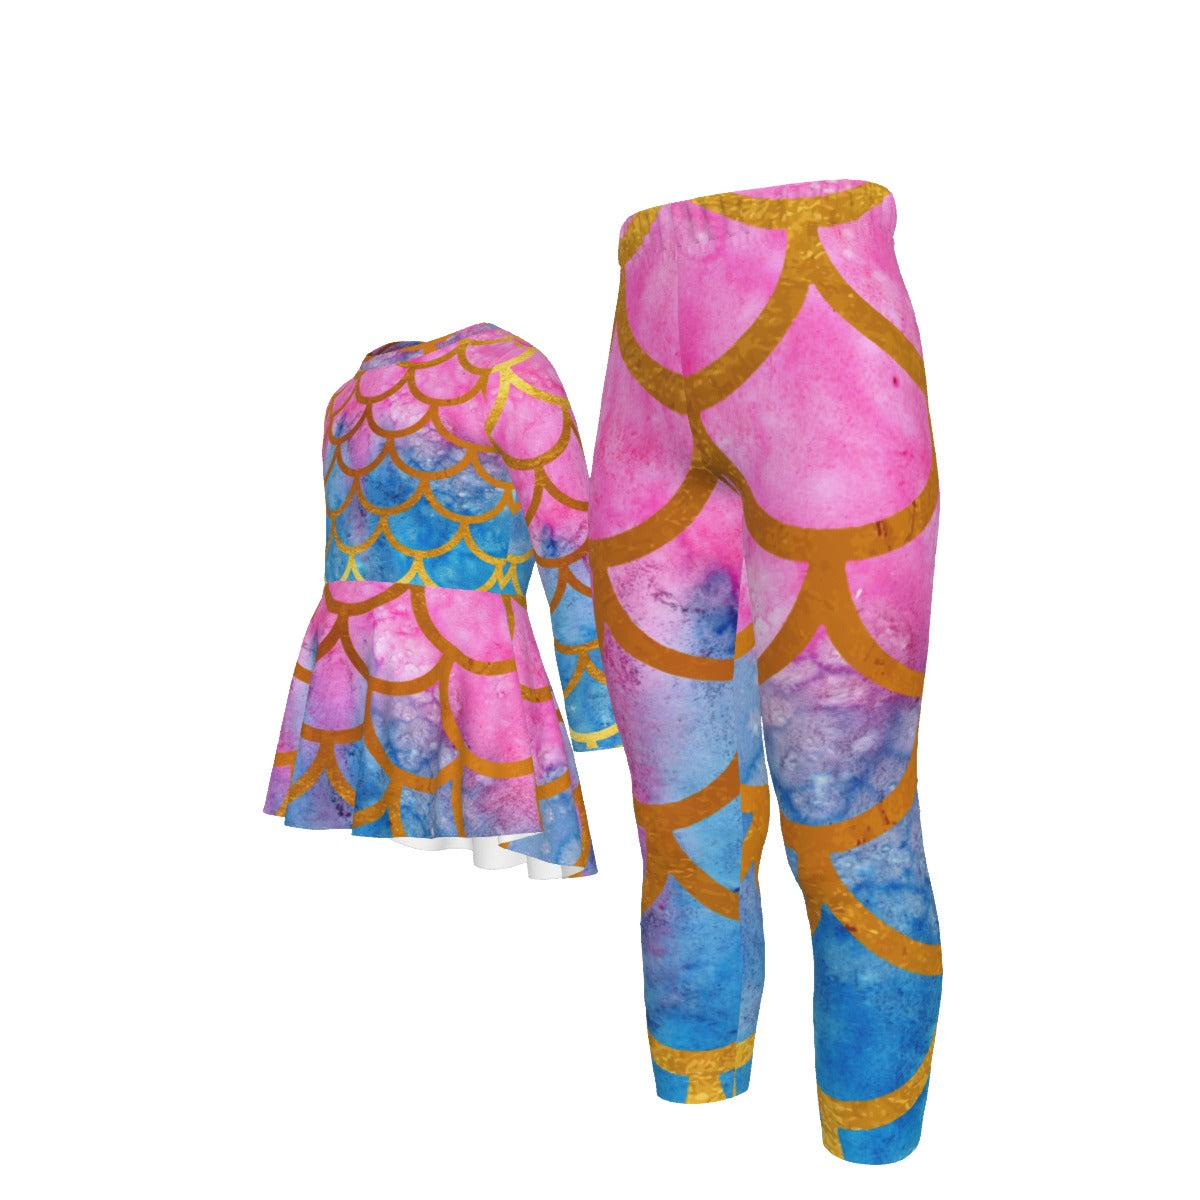 All-Over Print Kid's Casual Suit